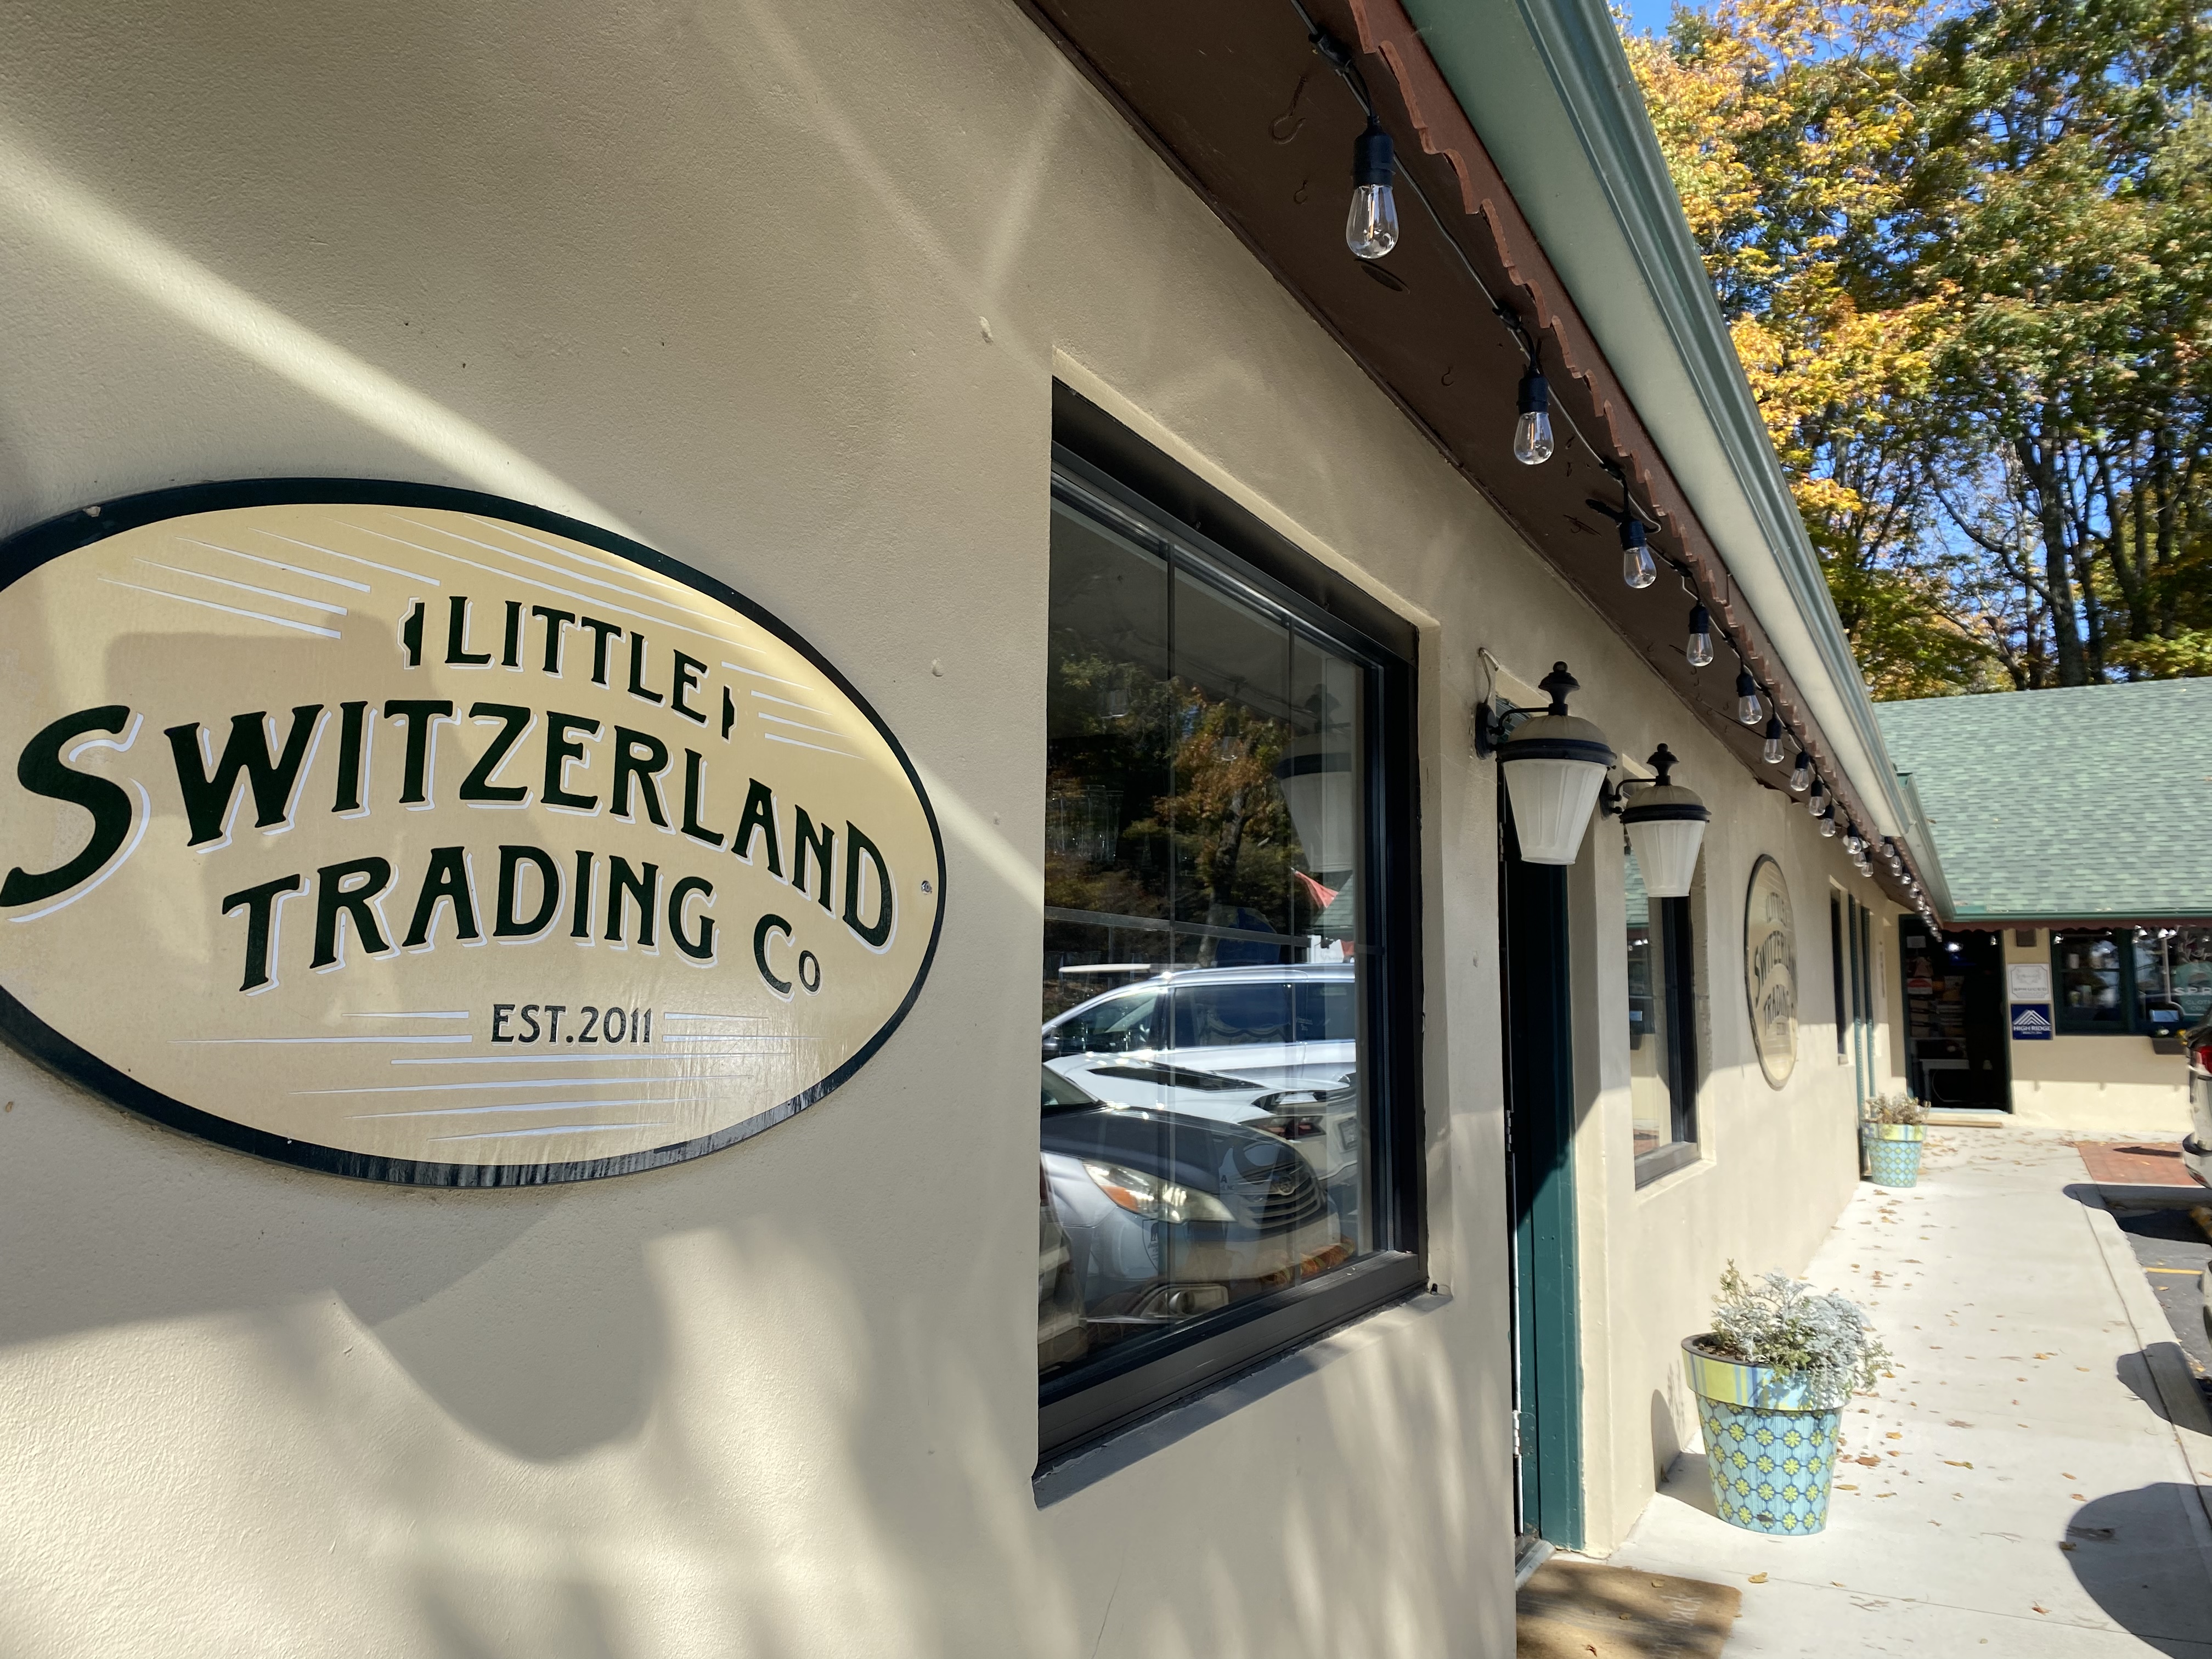 Little switzerland trading co store front